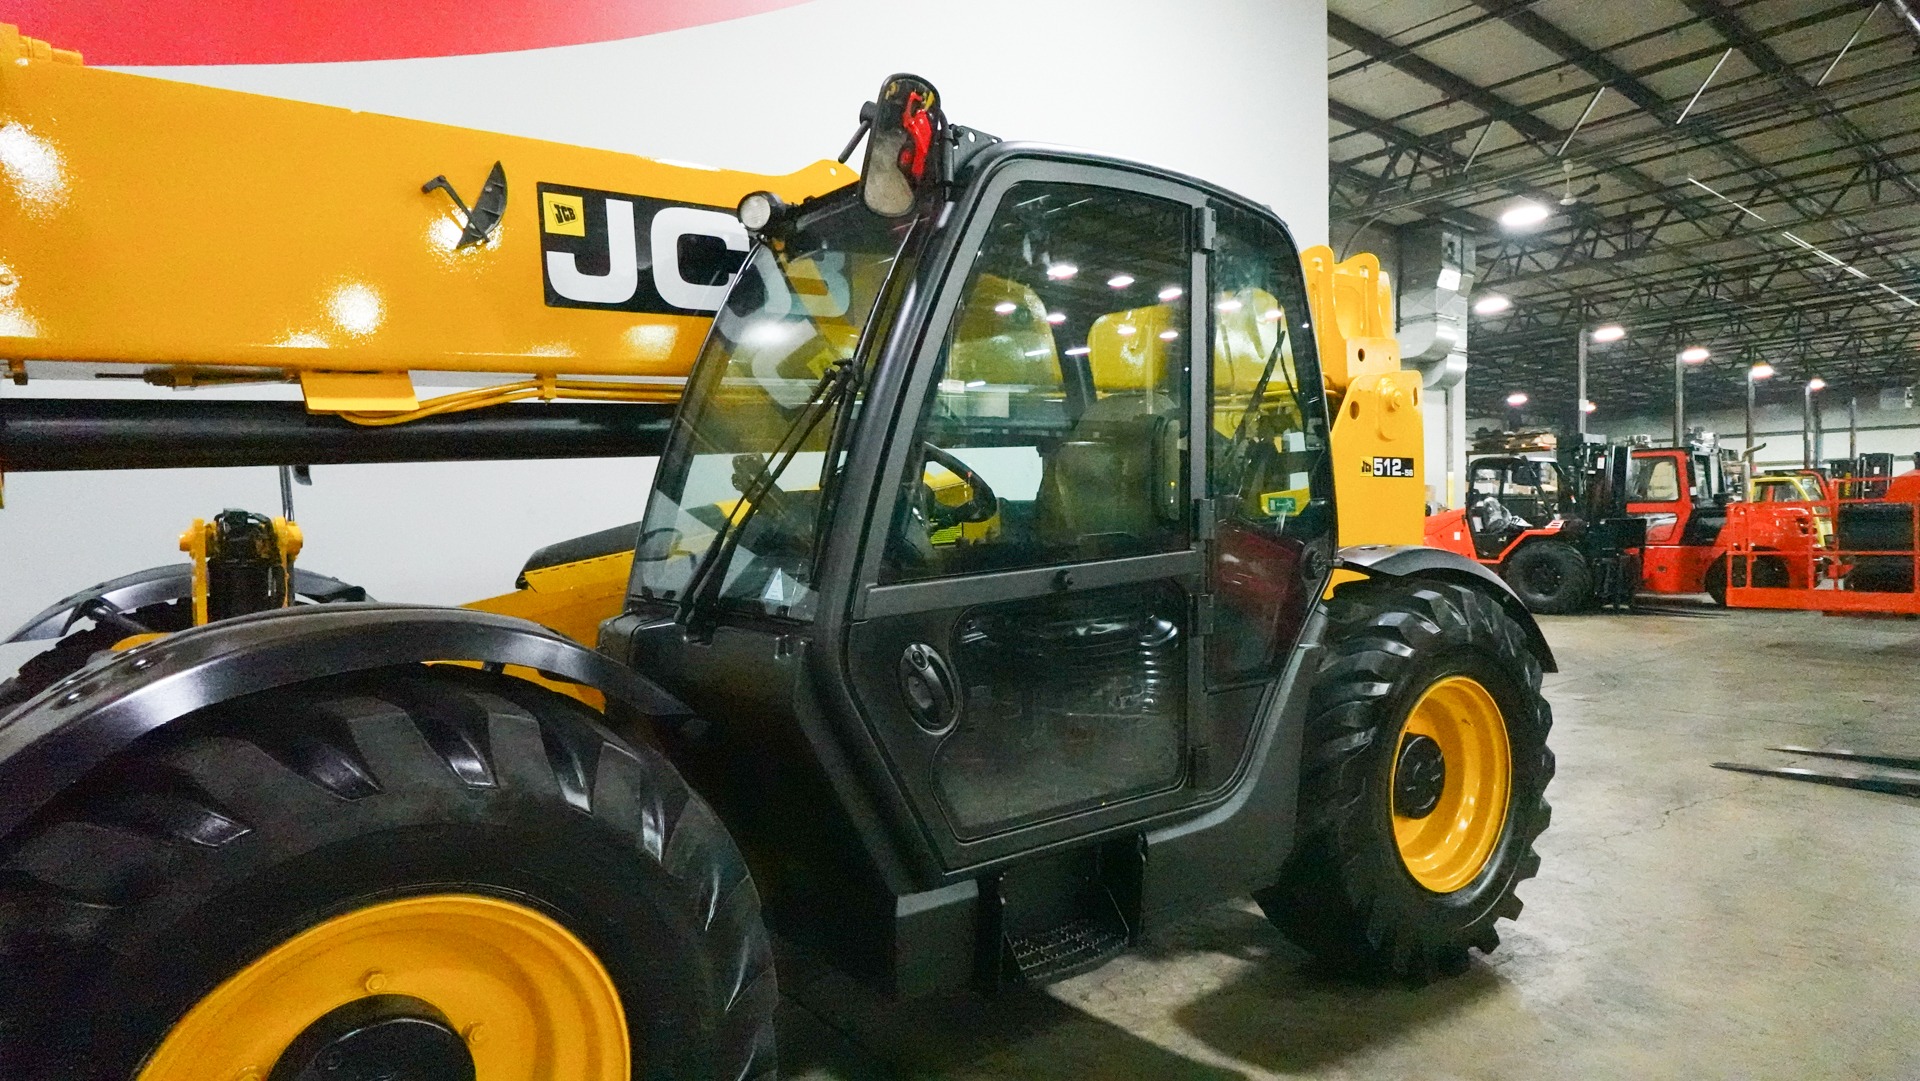 Used 2014 JCB 512-56  | Cary, IL